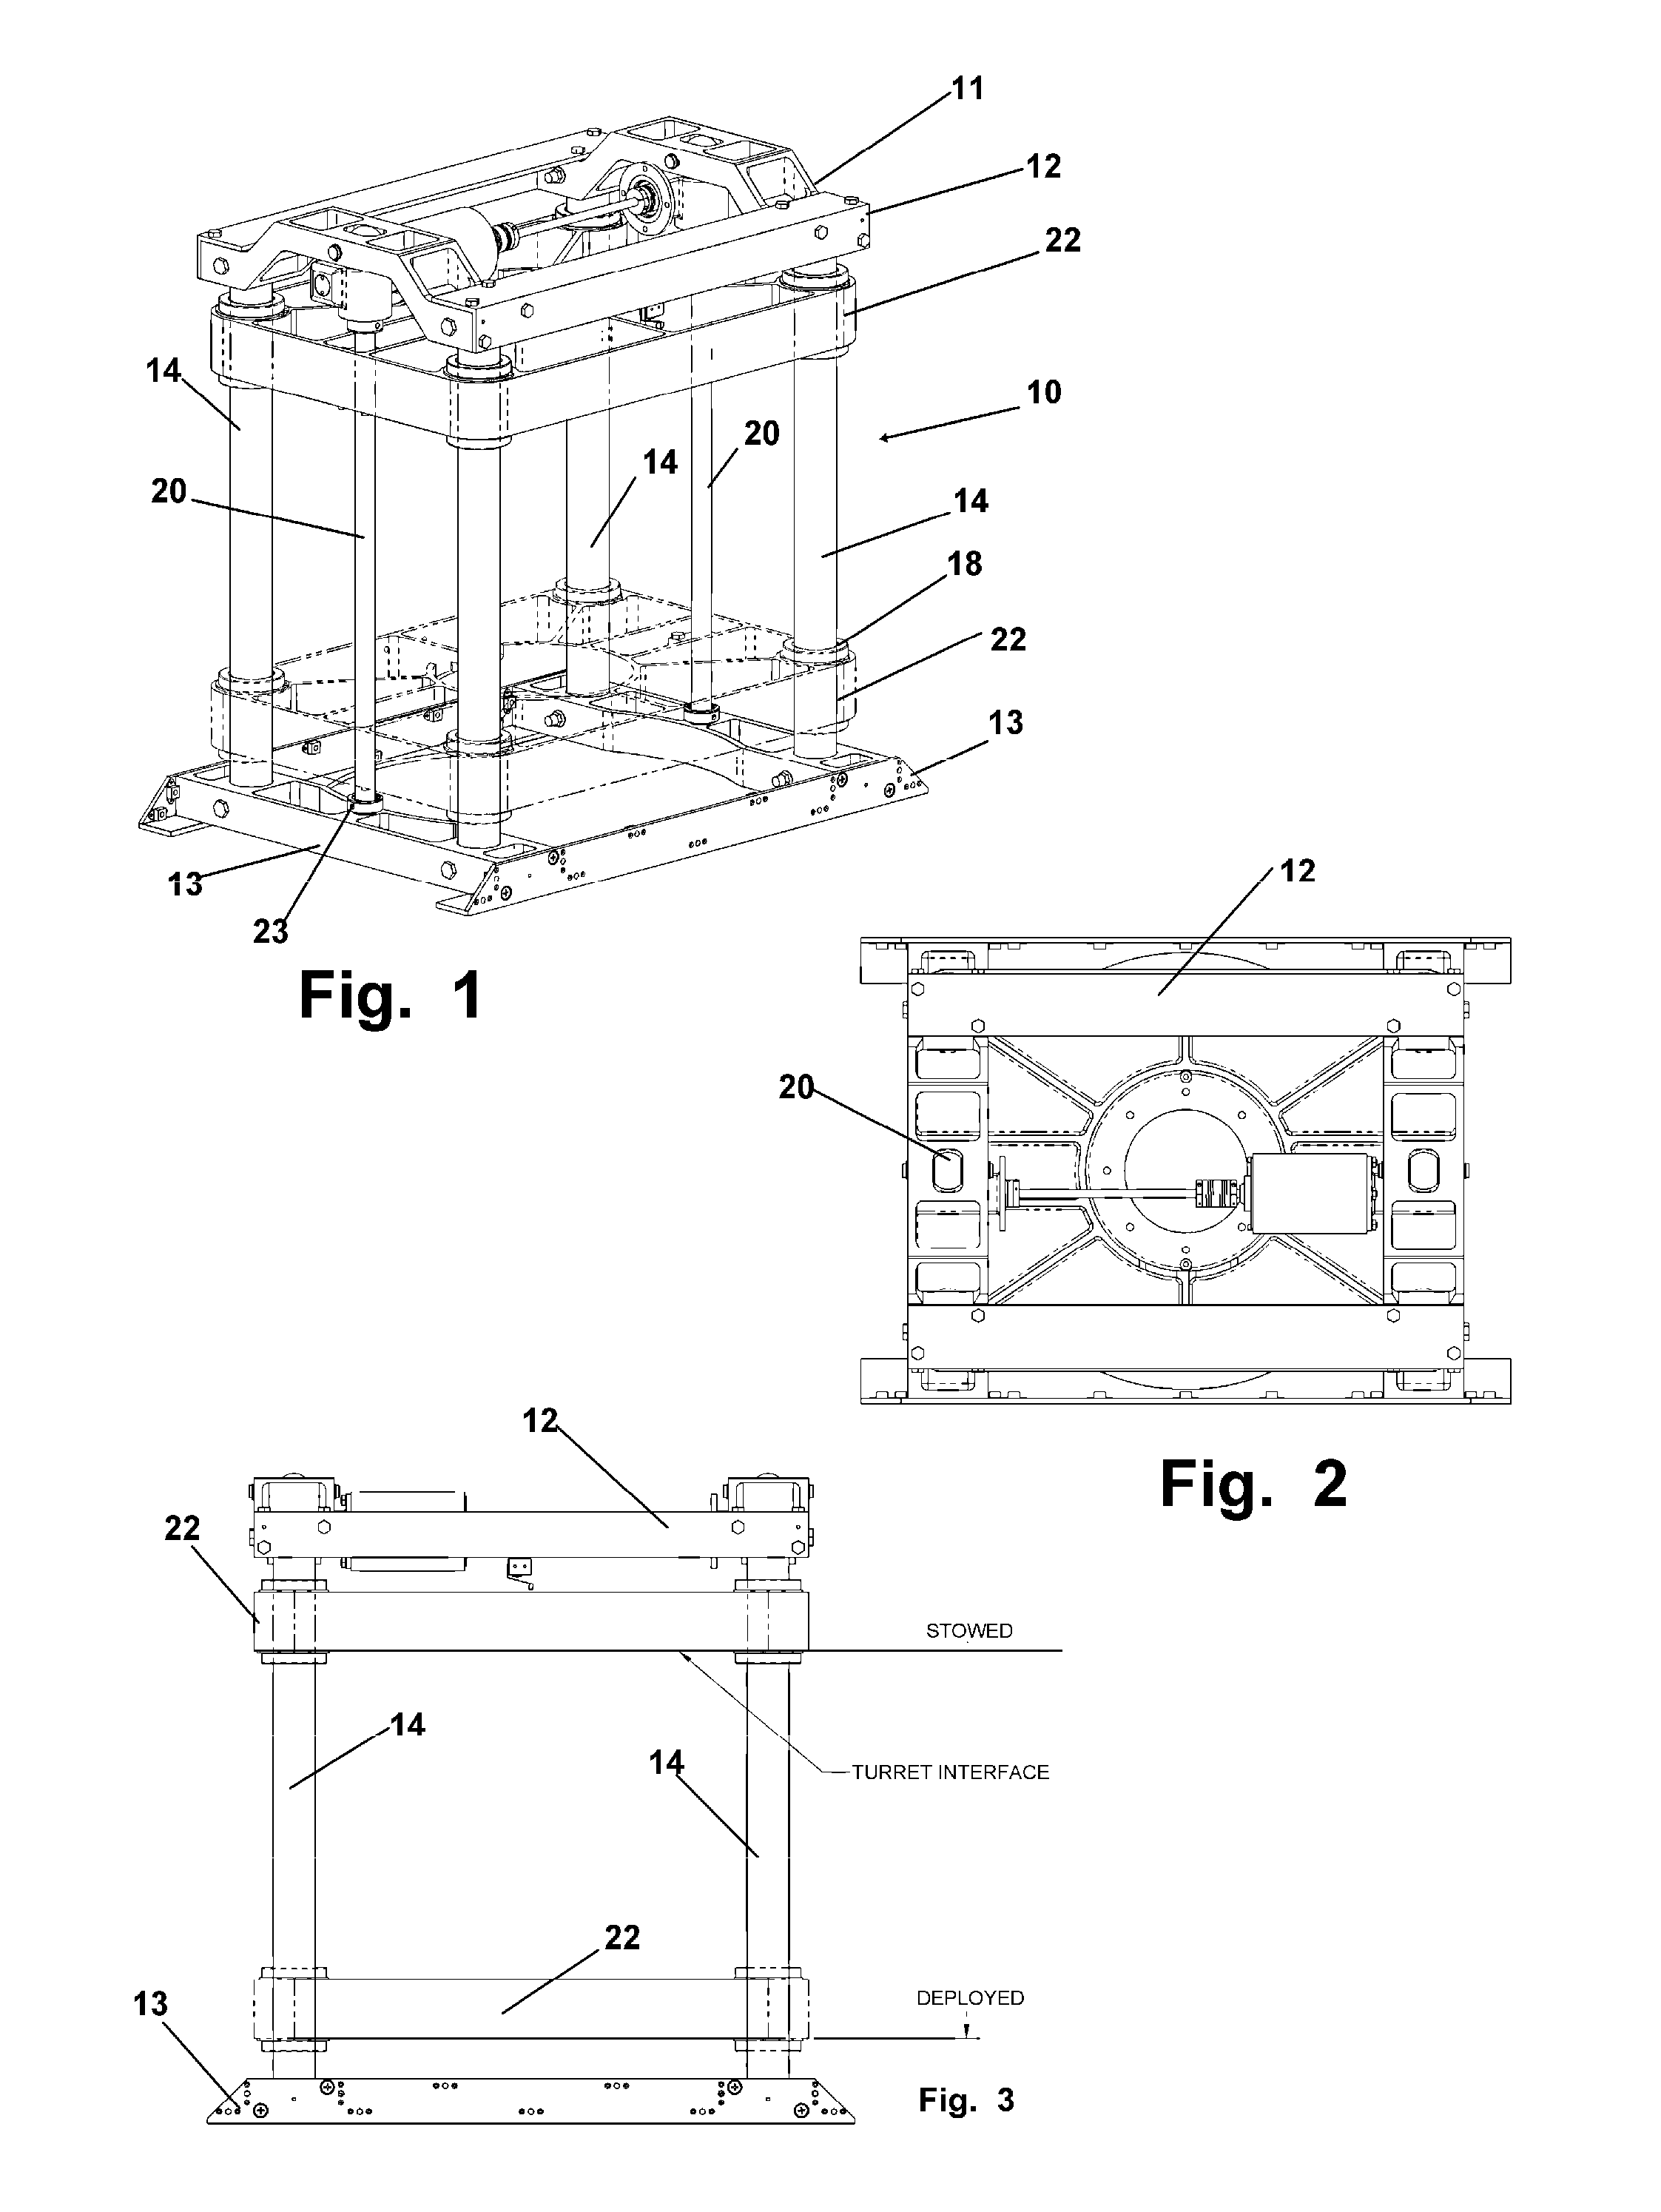 Payload door and elevator system